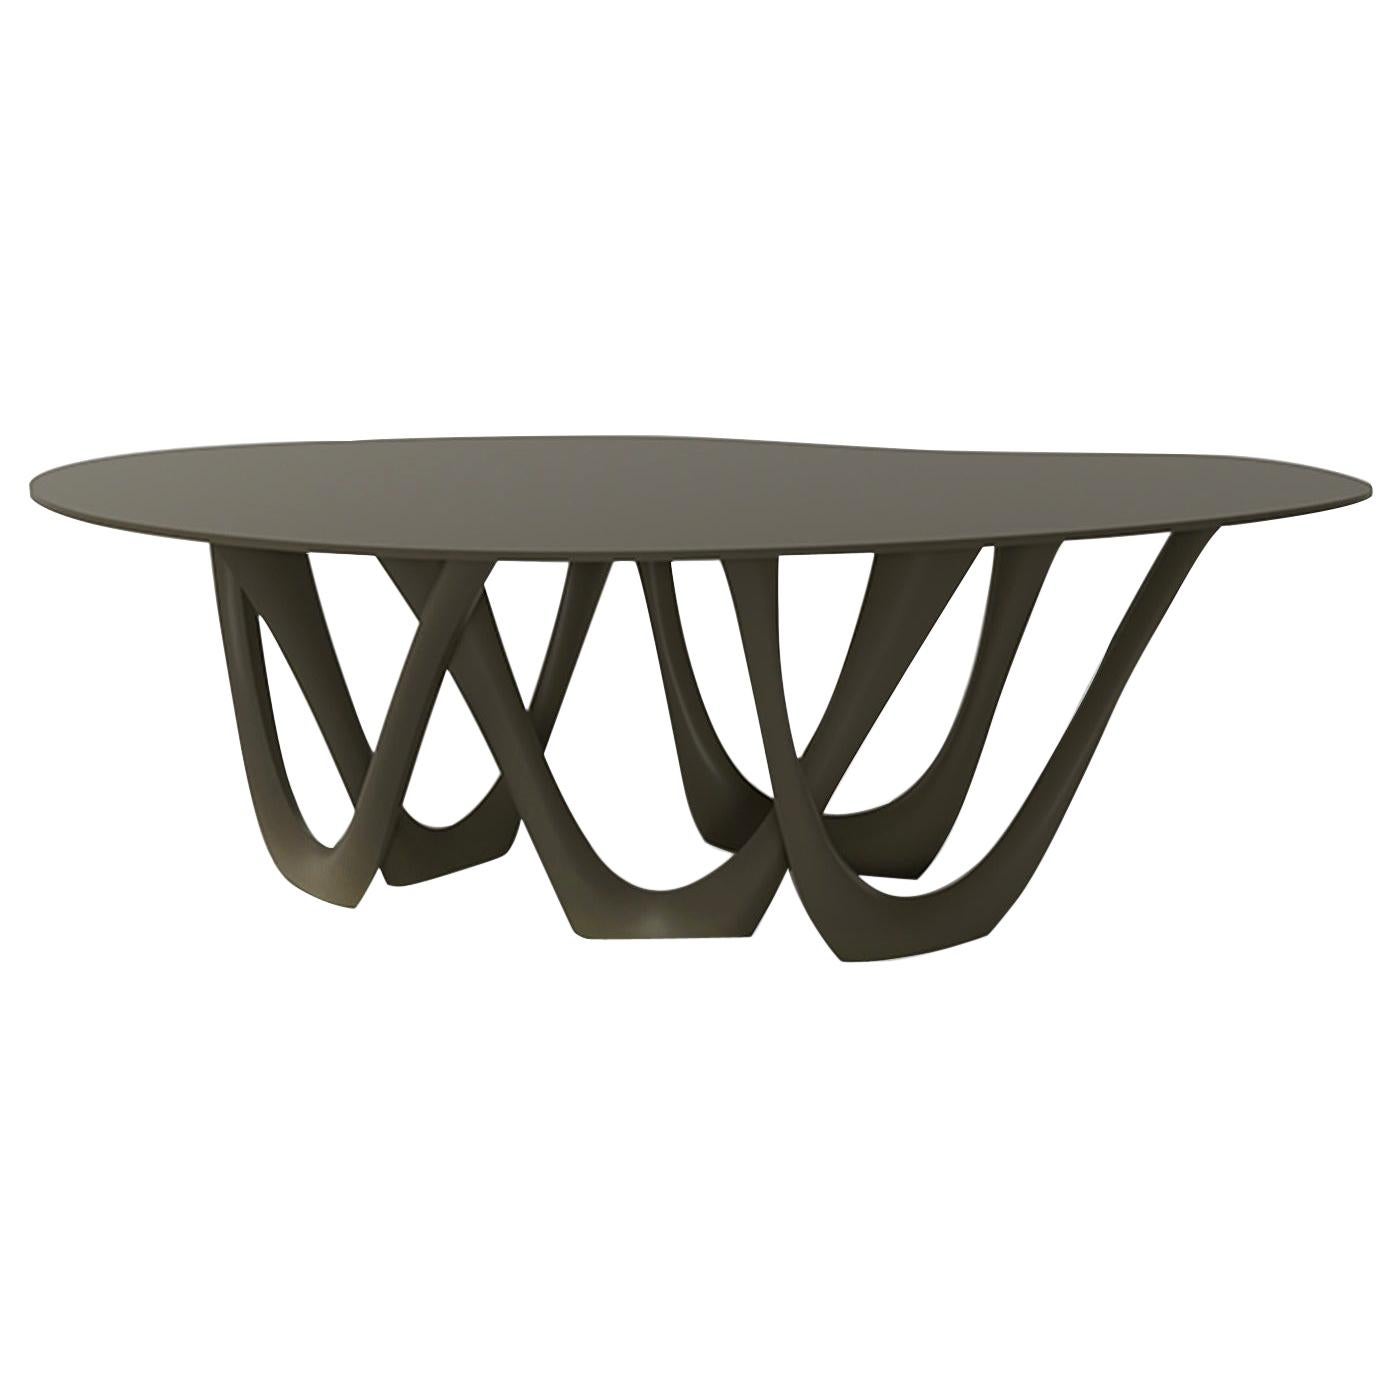 G-Table by Zieta, Powder-Coated Top and Base 'Umbra Grey'